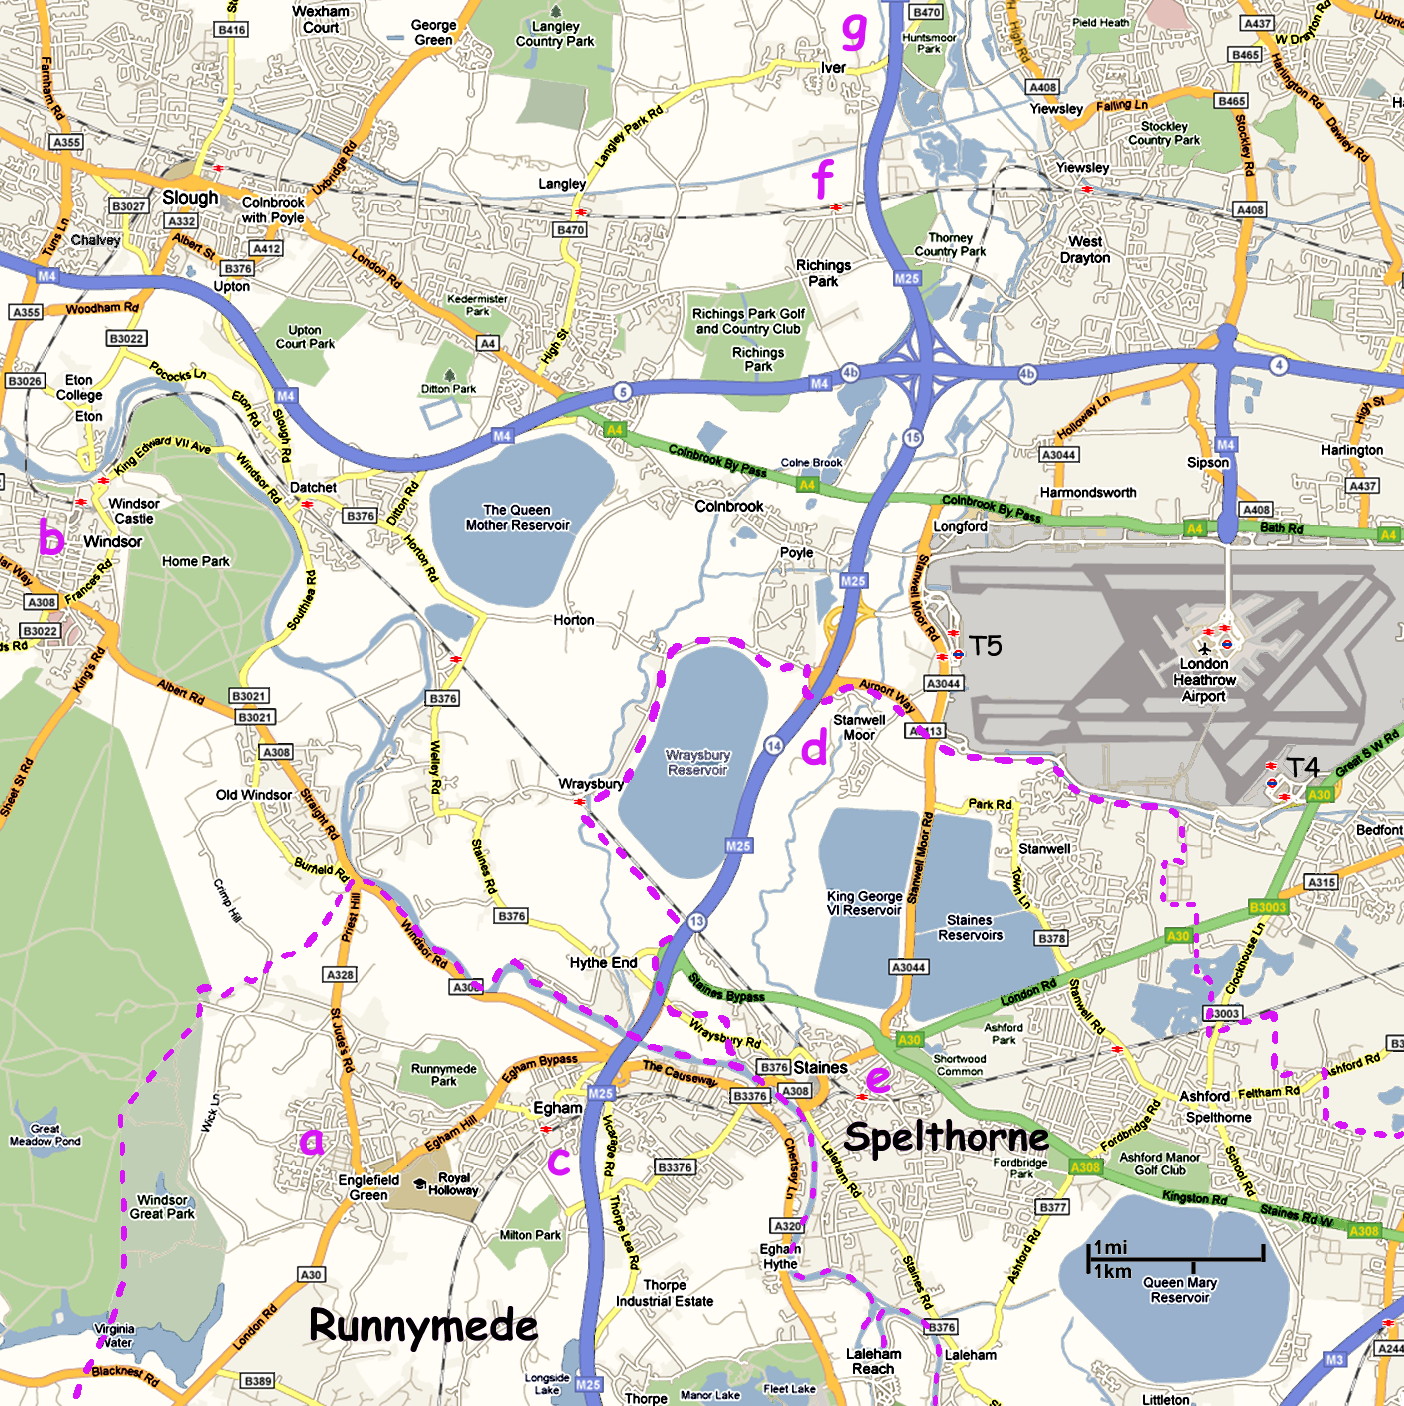 map of the area around Stanwell, Heathrow and Windsor